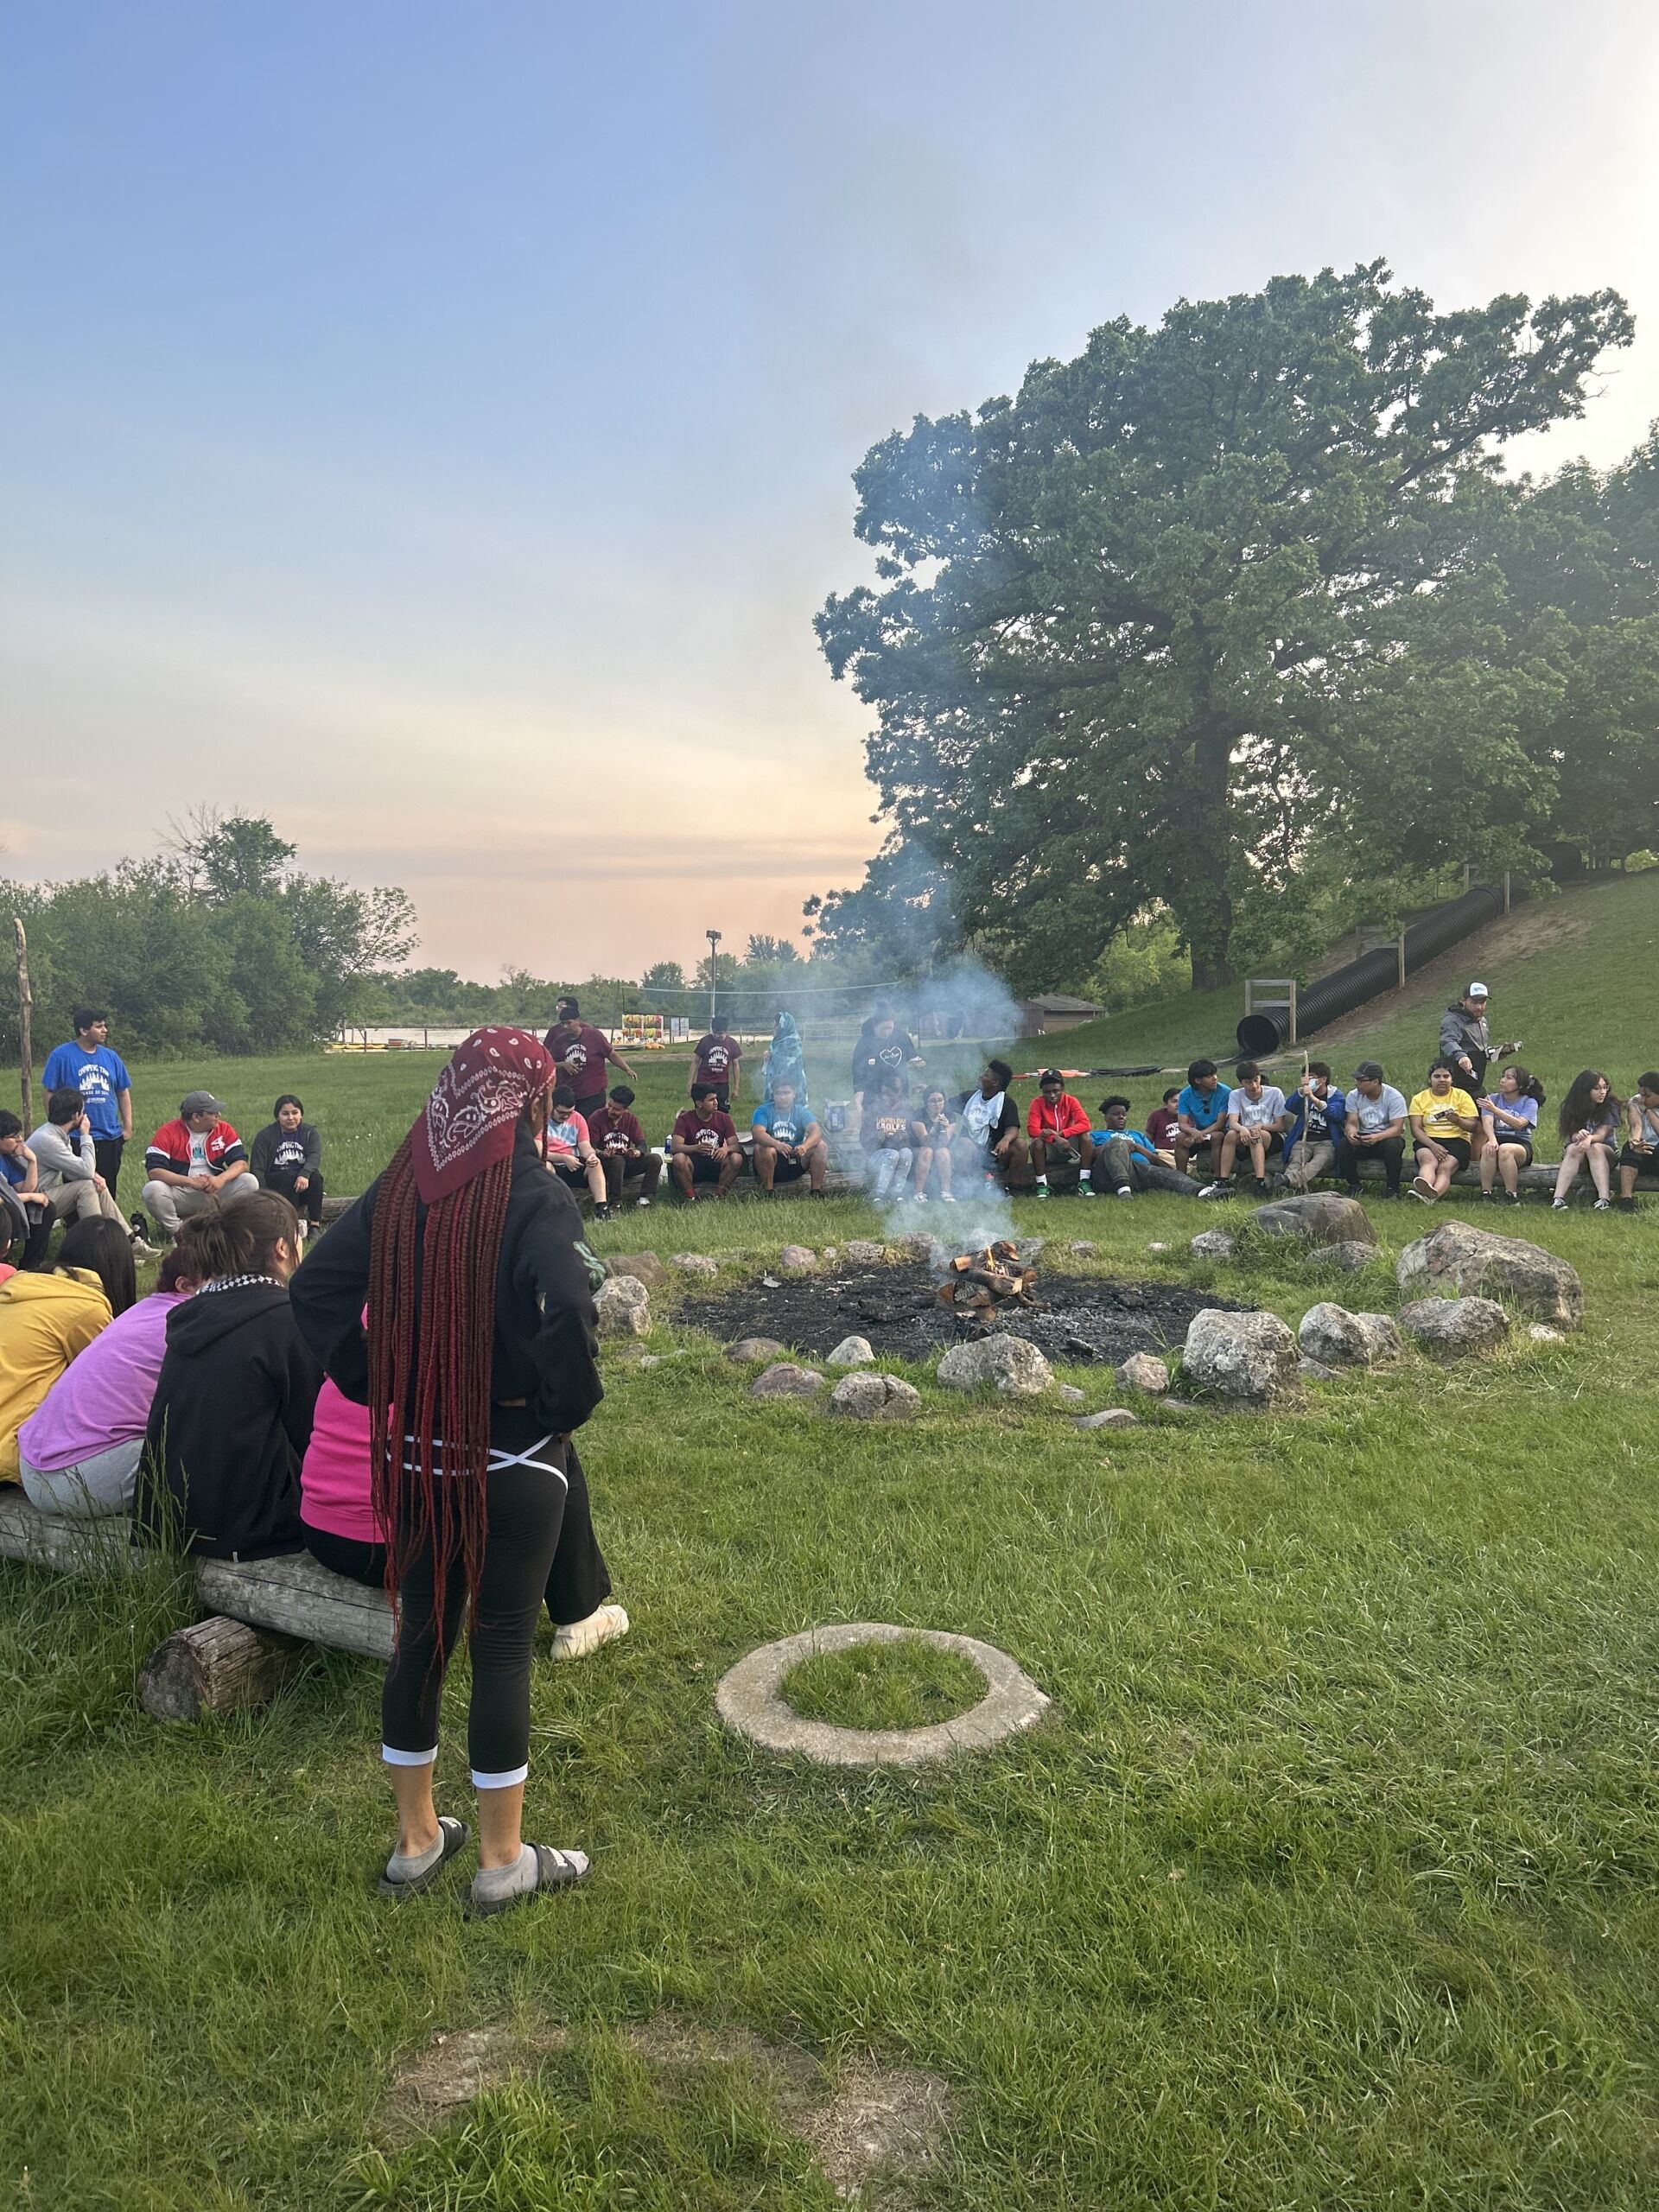 Students gather around the campfire during their senior trip. Students are sitting or standing up. Some are on their phones and others are talking to each other. The campfire has smoke coming out.